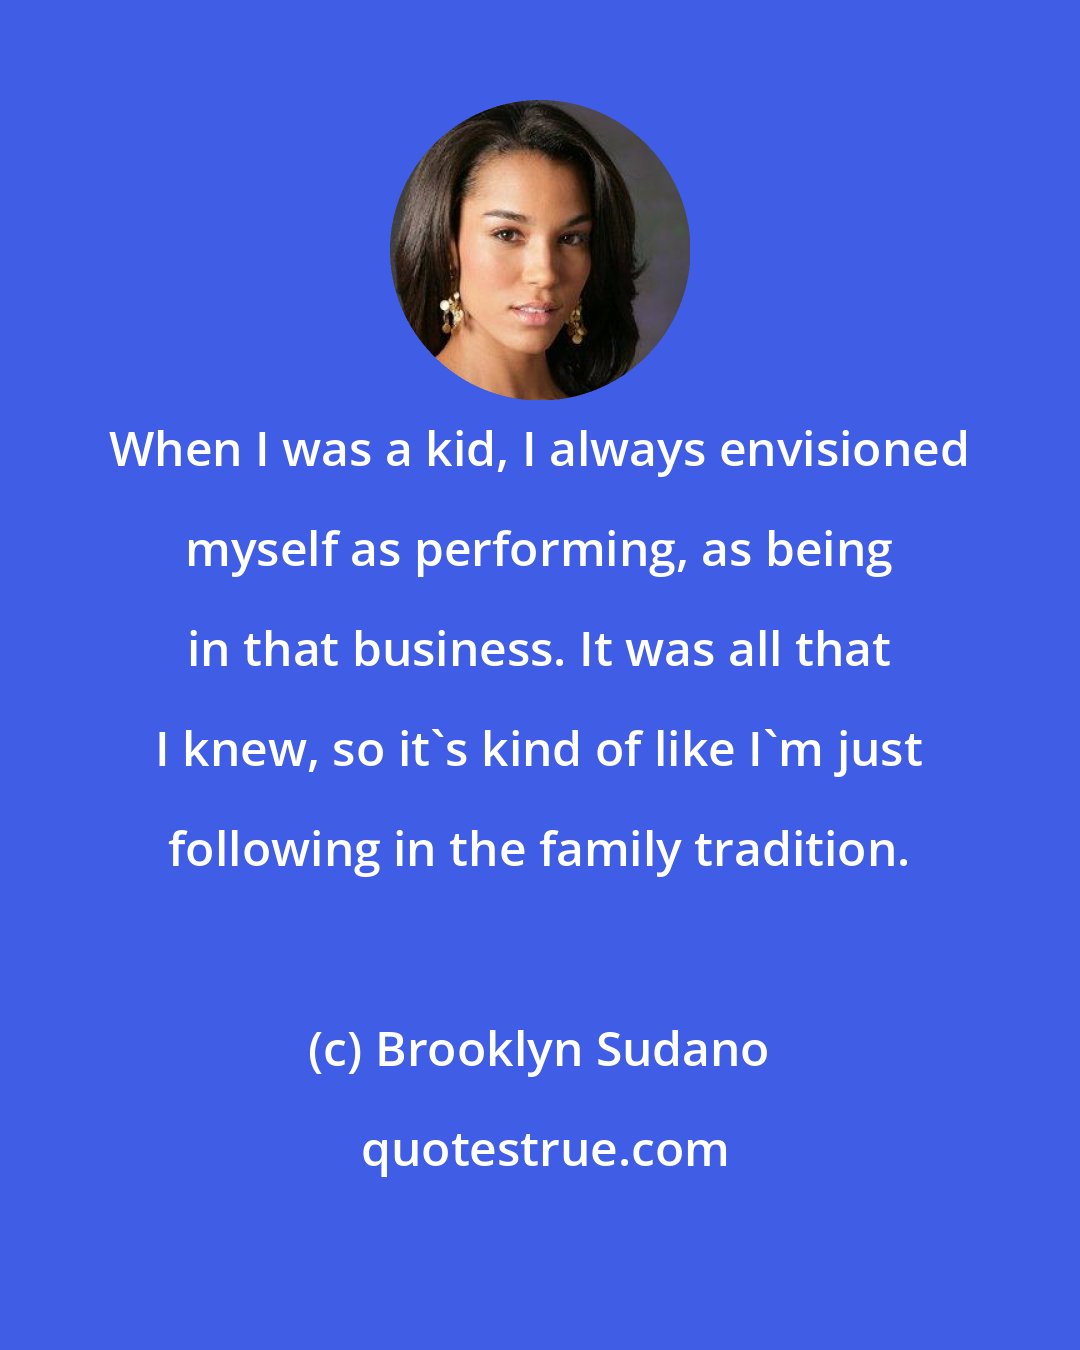 Brooklyn Sudano: When I was a kid, I always envisioned myself as performing, as being in that business. It was all that I knew, so it's kind of like I'm just following in the family tradition.